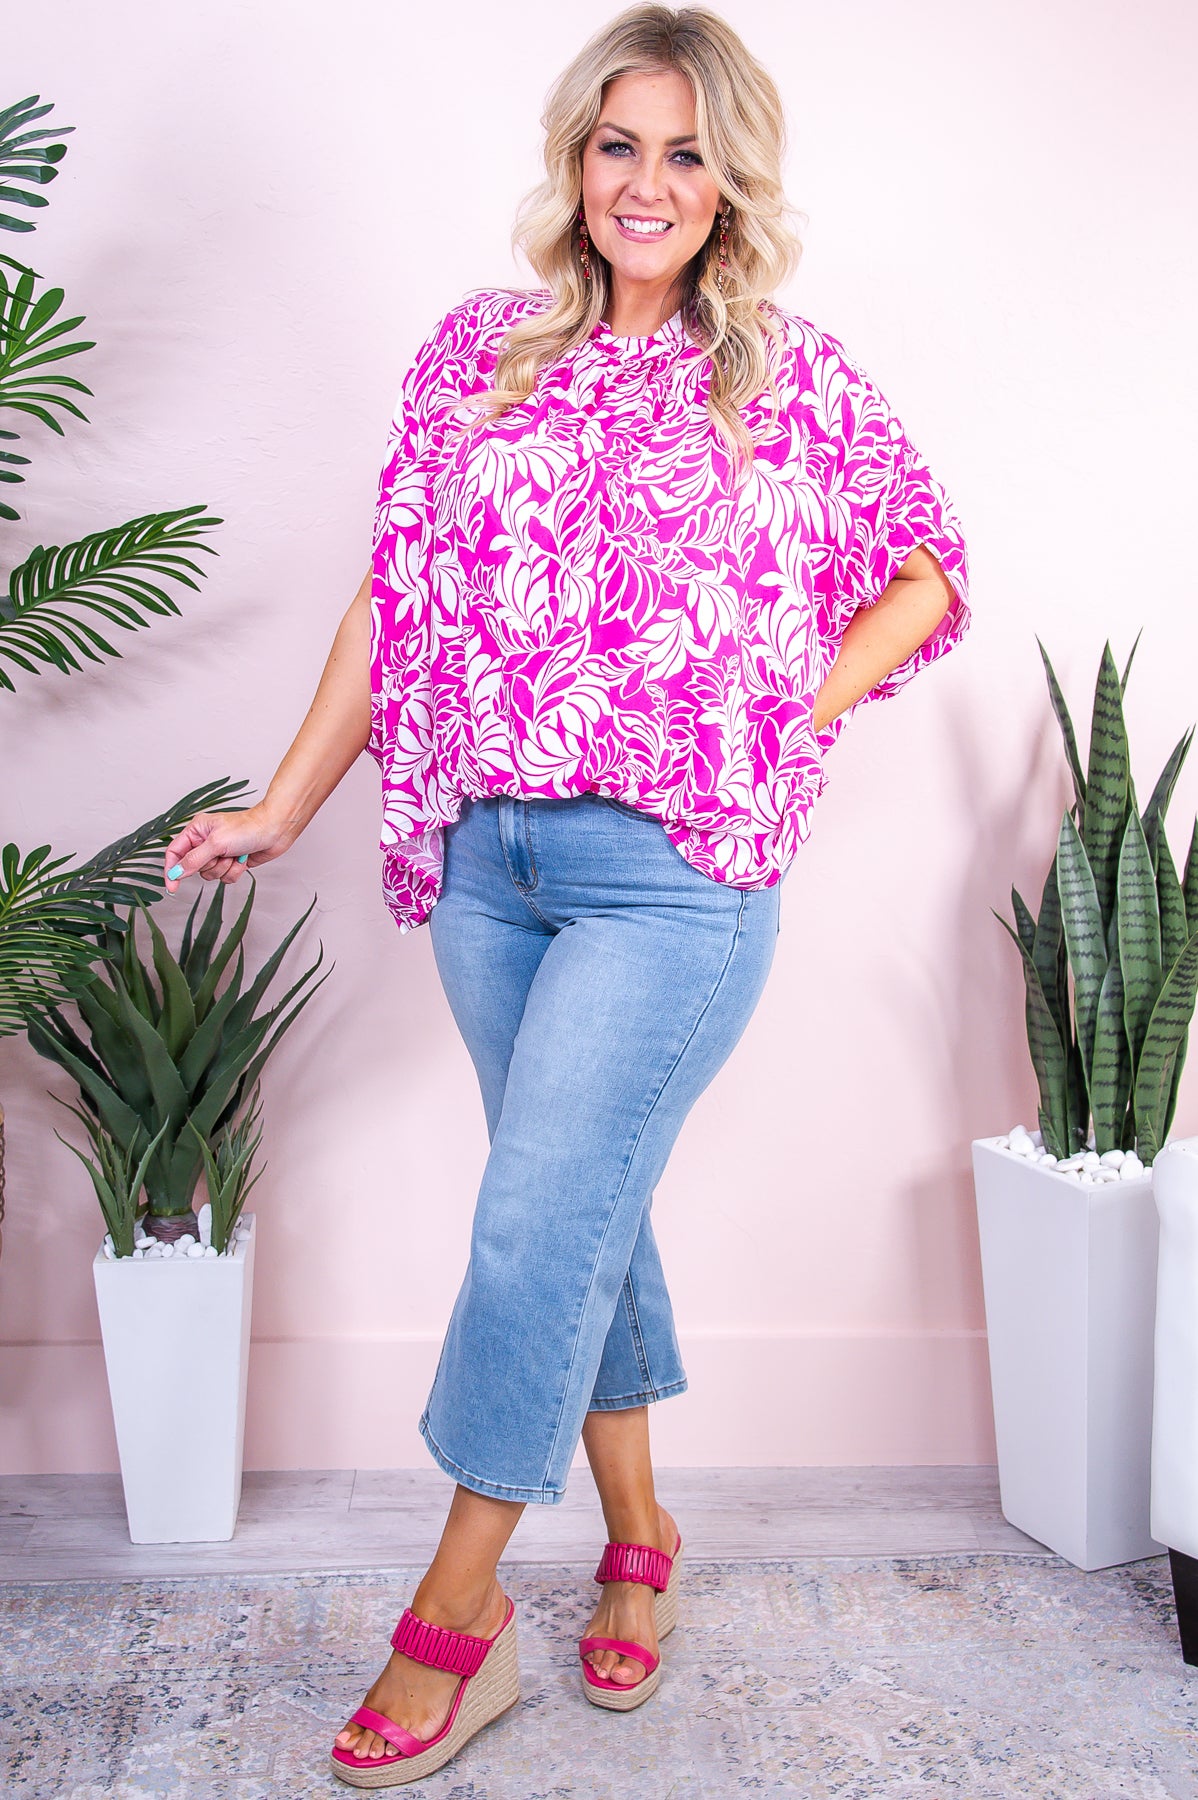 At The Harbor Hot Pink/White Floral Asymmetrical Top - T9556HPK